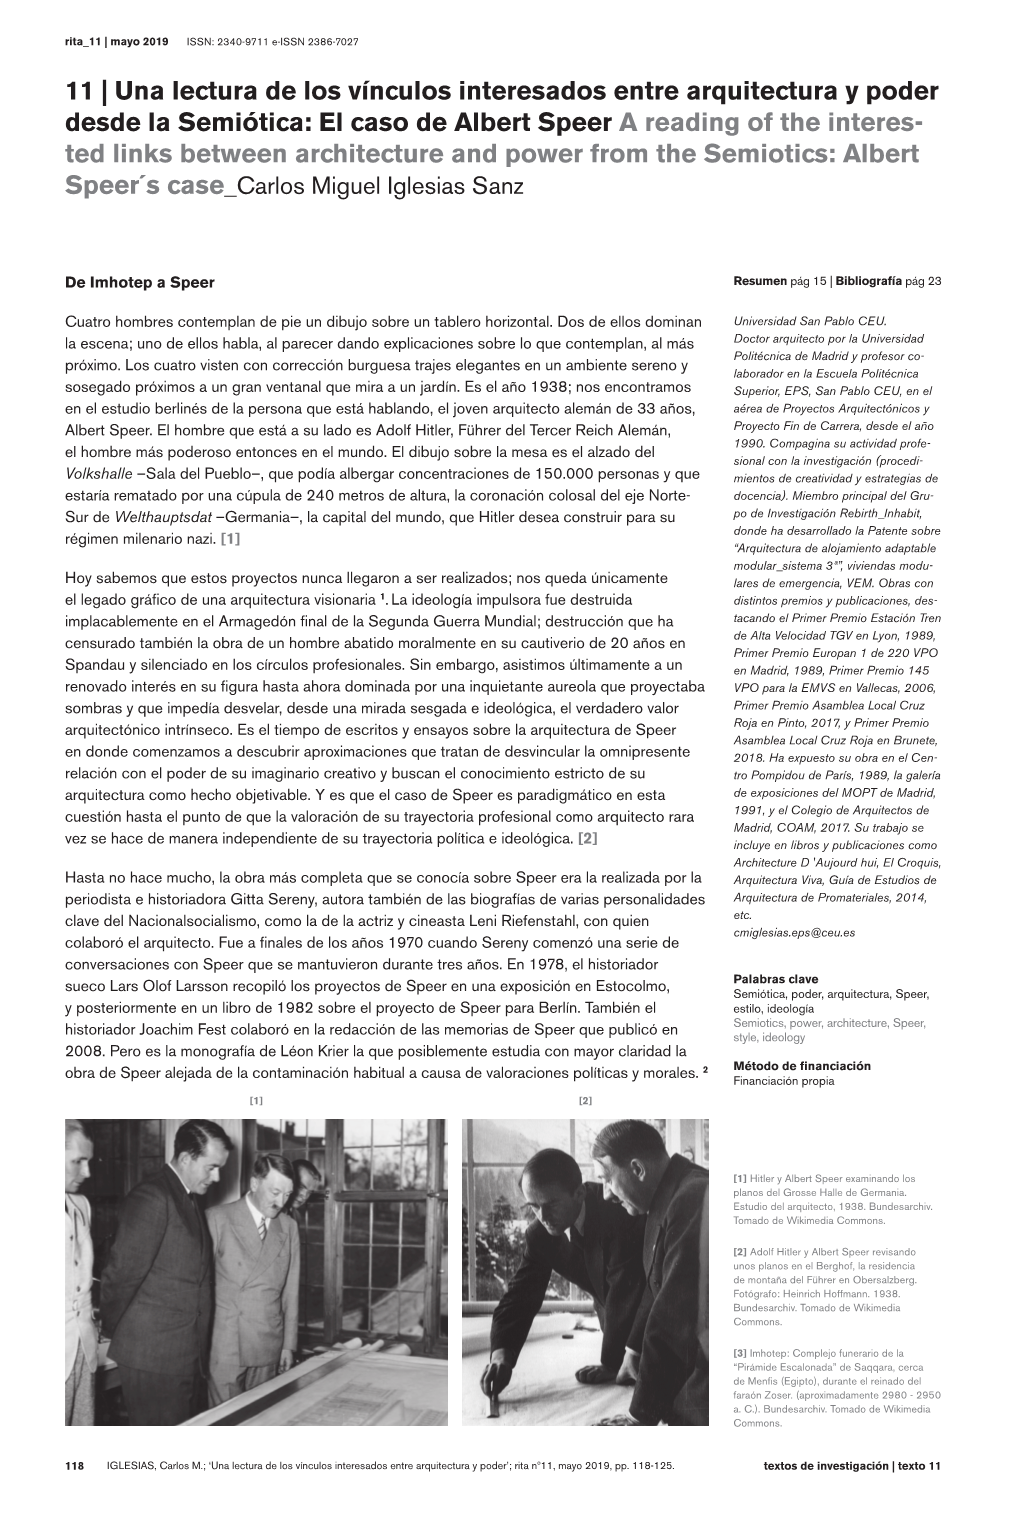 El Caso De Albert Speer a Reading of the Interes- Ted Links Between Architecture and Power from the Semiotics: Albert Speer´S Case Carlos Miguel Iglesias Sanz